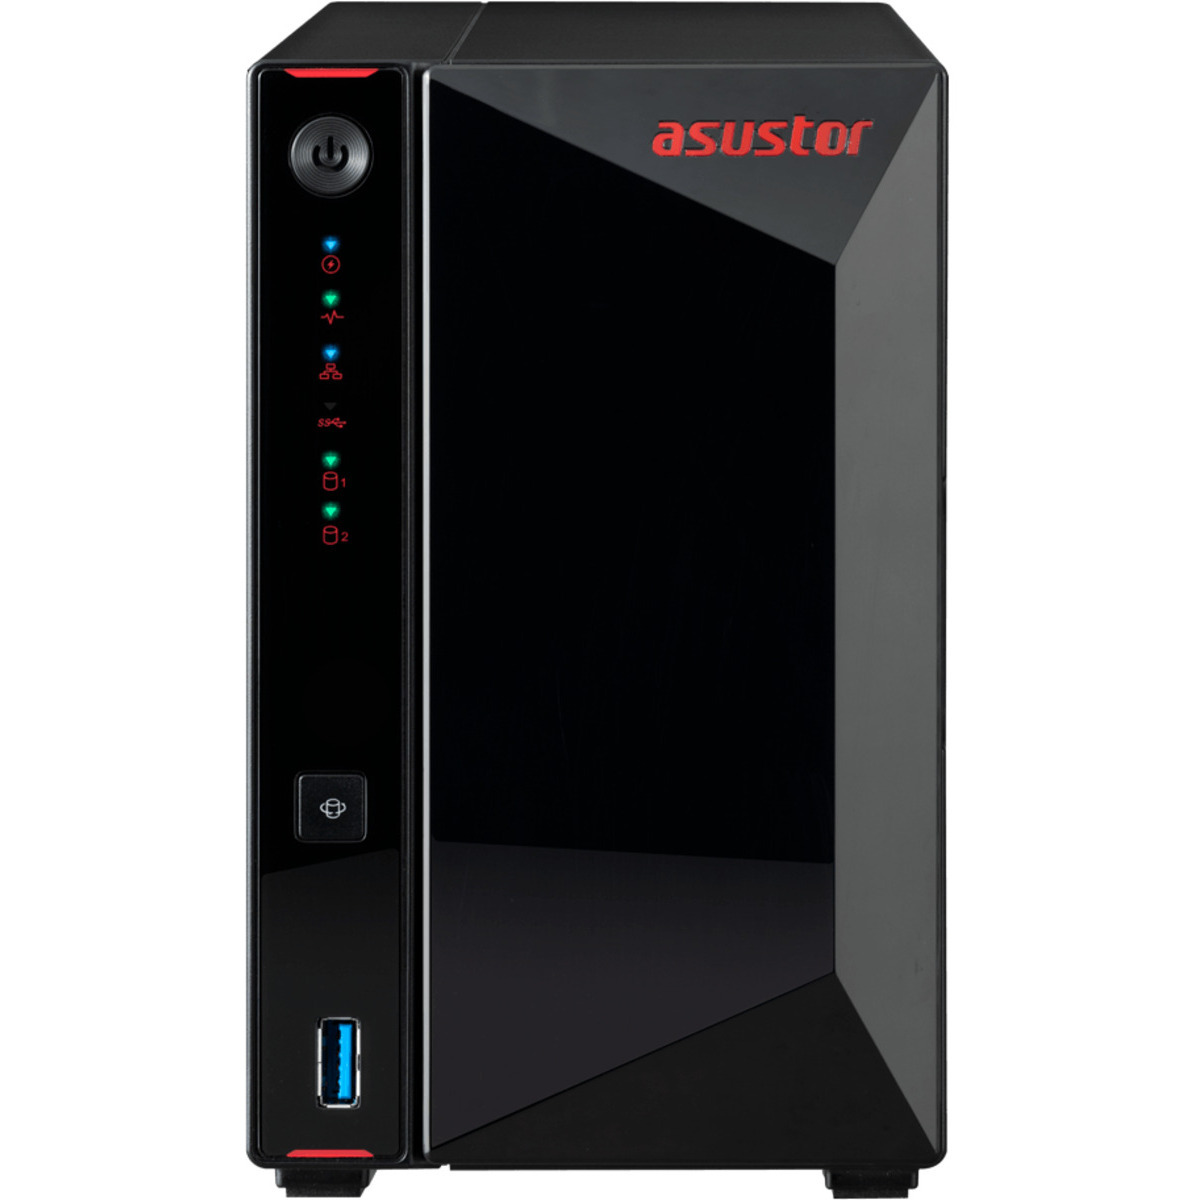 buy $692 ASUSTOR AS5202T Nimbustor 12tb Desktop NAS - Network Attached Storage Device 2x6000gb Seagate IronWolf Pro ST6000NE000 3.5 7200rpm SATA 6Gb/s HDD NAS Class Drives Installed - Burn-In Tested - FREE RAM UPGRADE - nas headquarters buy network attached storage server device das new raid-5 free shipping usa AS5202T Nimbustor